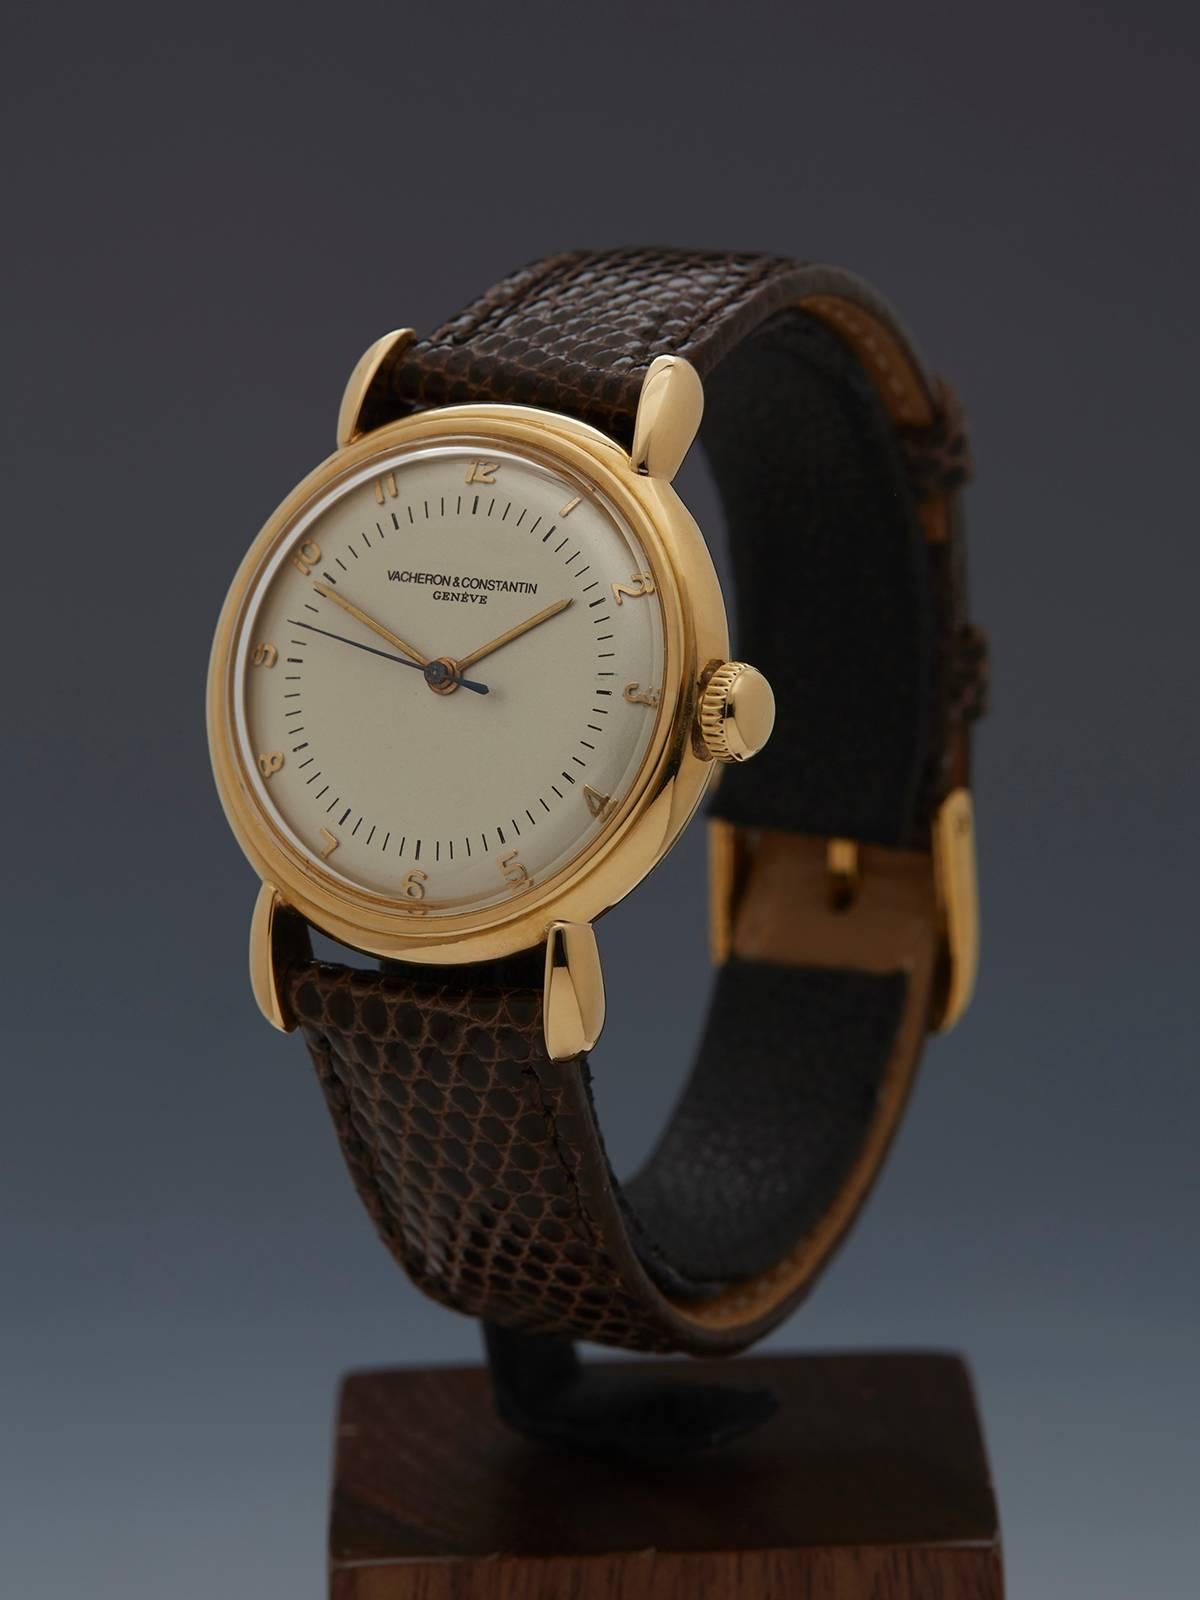 Specifications

Ref: W2317
Movement: Mechanical Wind 
Case: 18k Yellow Gold 
Case Diameter: 31mm
Dial: Cream 
Bracelet: Brown Lizard Leather 
Strap Length: Adjustable up to 20cm
Strap Width: At Case - 17mm/At Buckle - 16mm 
Buckle: Tang
Glass: